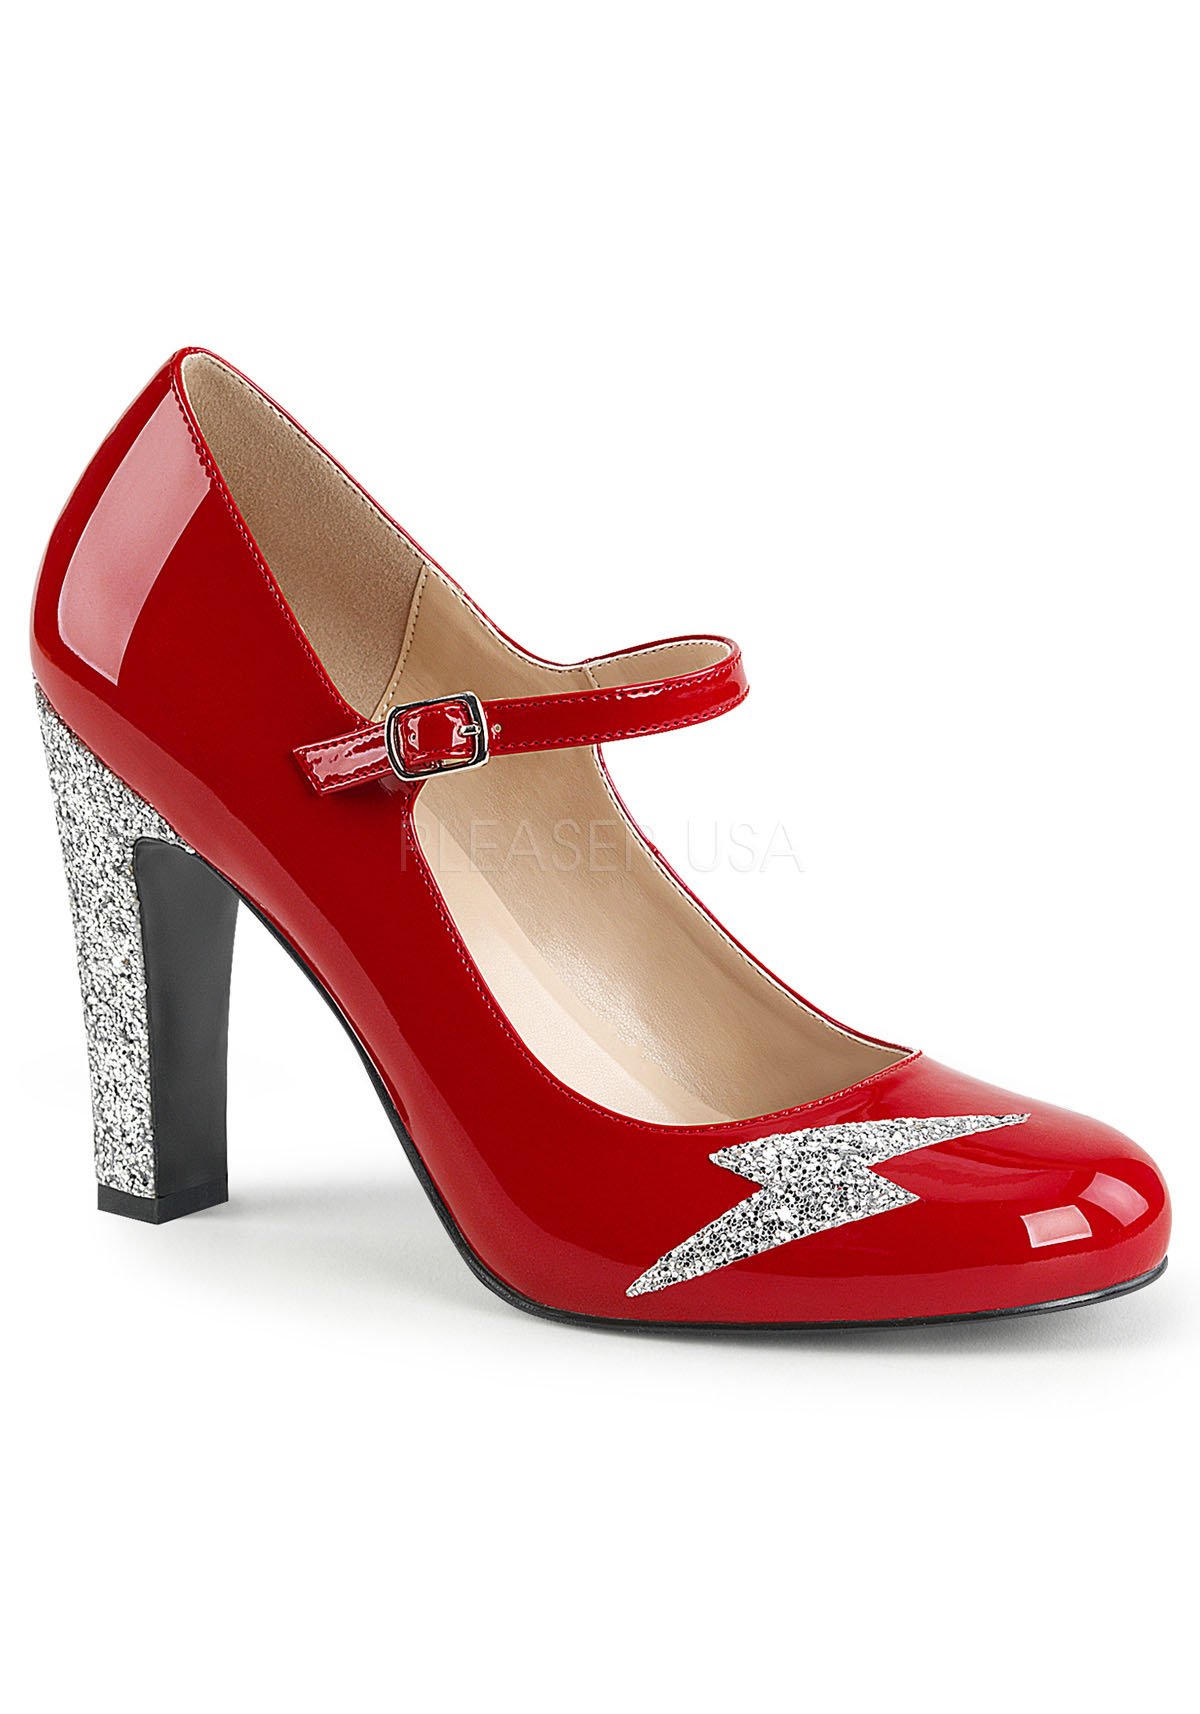 Womens Red Mary Jane Heels Round Toe Shoes Patent Platform Pumps 4 Inch Heels